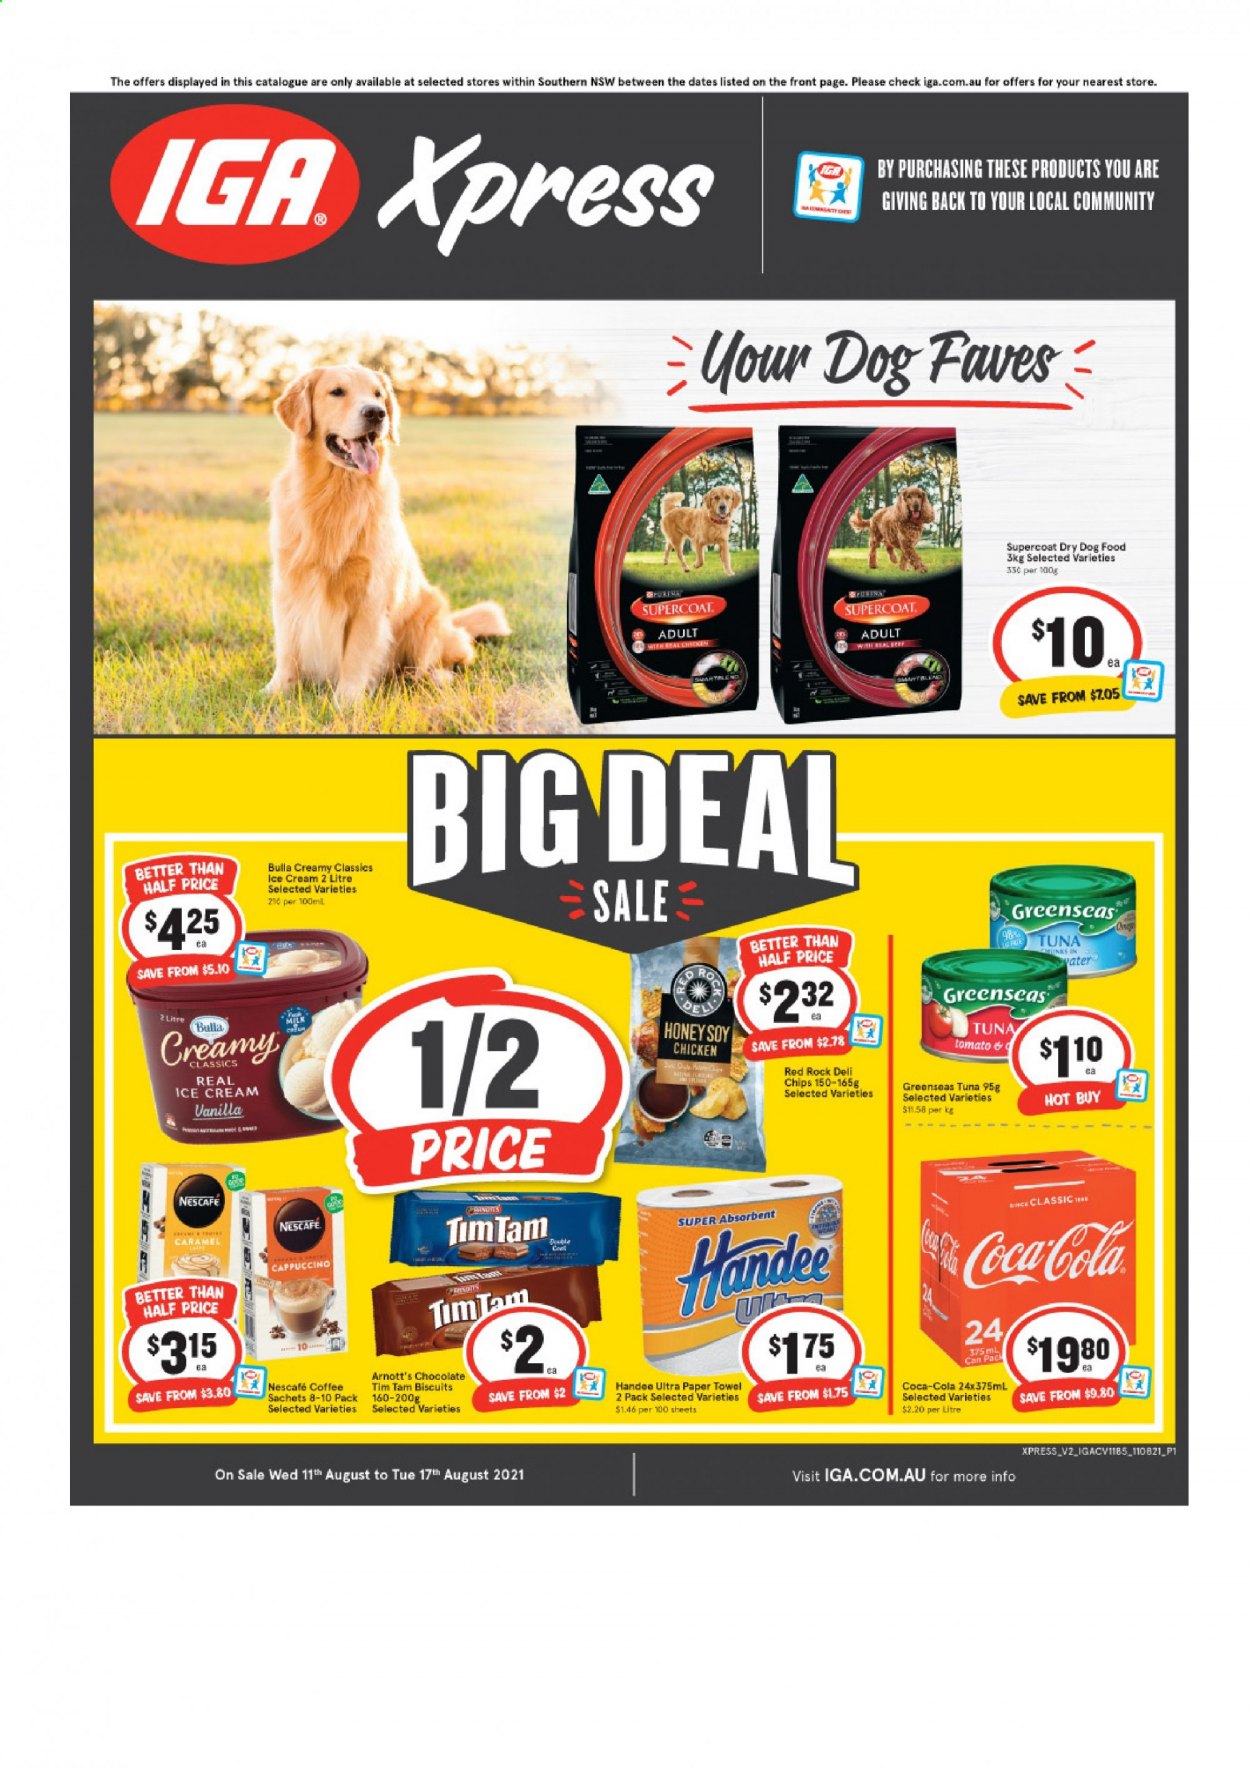 thumbnail - IGA Xpress Catalogue - 11 Aug 2021 - 17 Aug 2021 - Sales products - milk, ice cream, Tim Tam, biscuit, chips, honey, Coca-Cola, coffee, Nescafé, Handee, paper towels, animal food, dog food, Supercoat, dry dog food. Page 1.